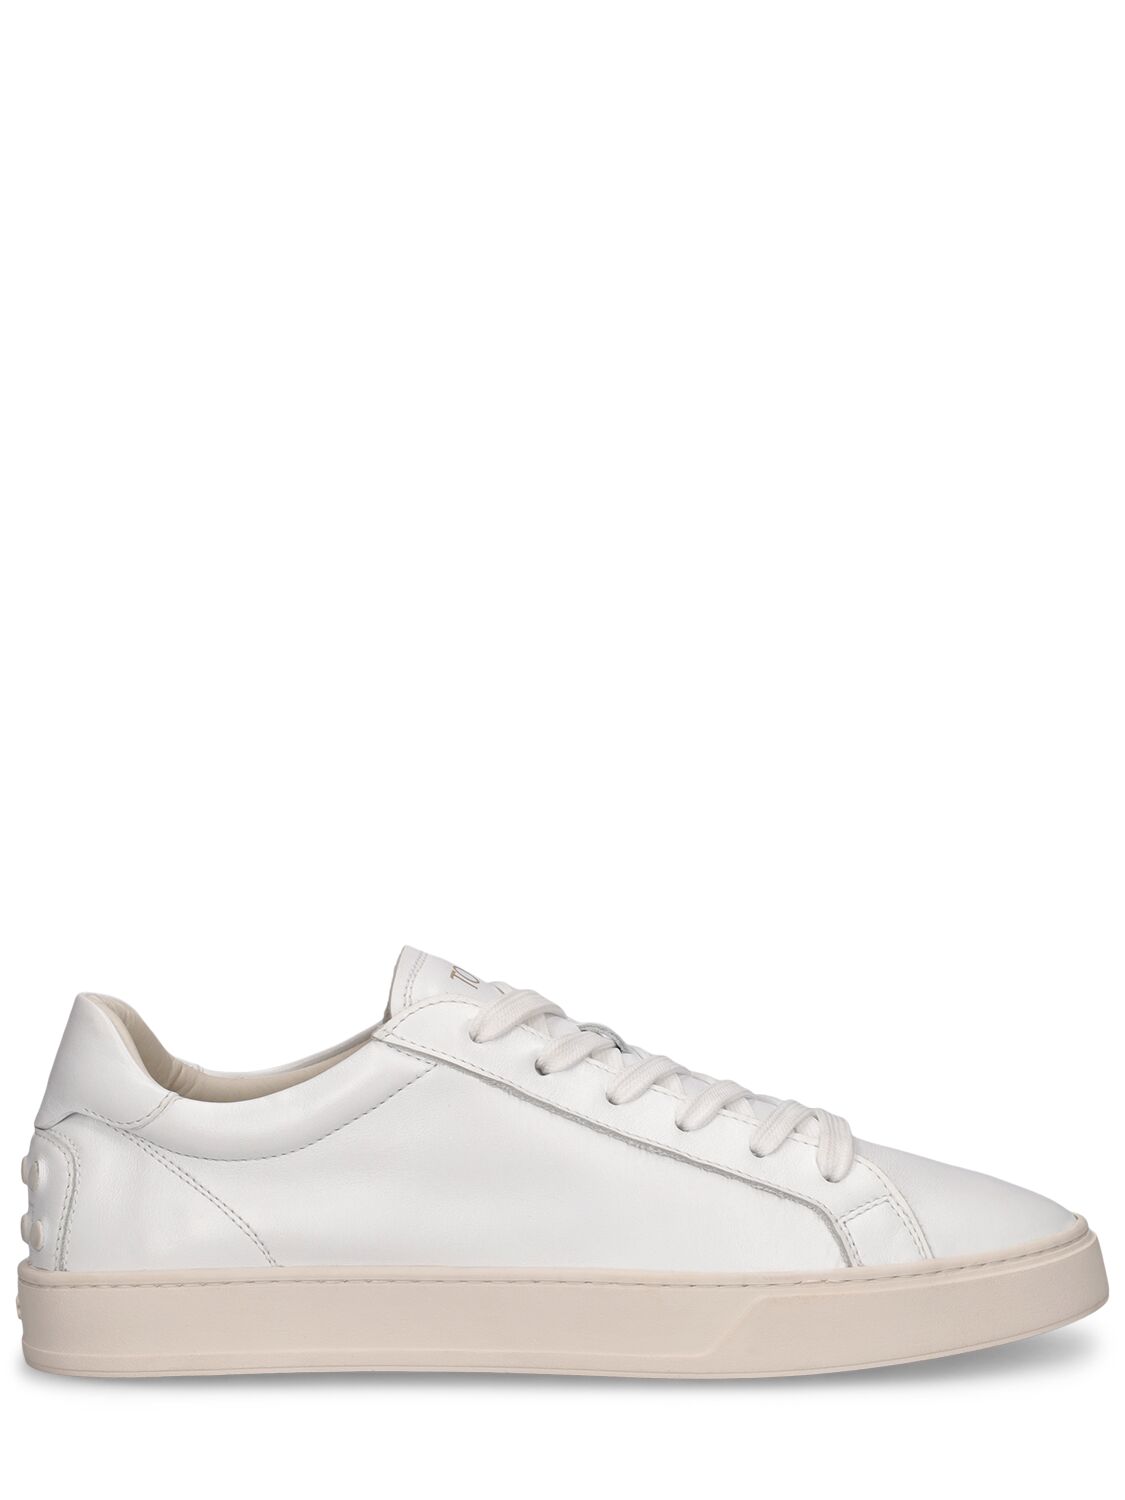 Tod's Leather Formal Low Top Sneakers In White